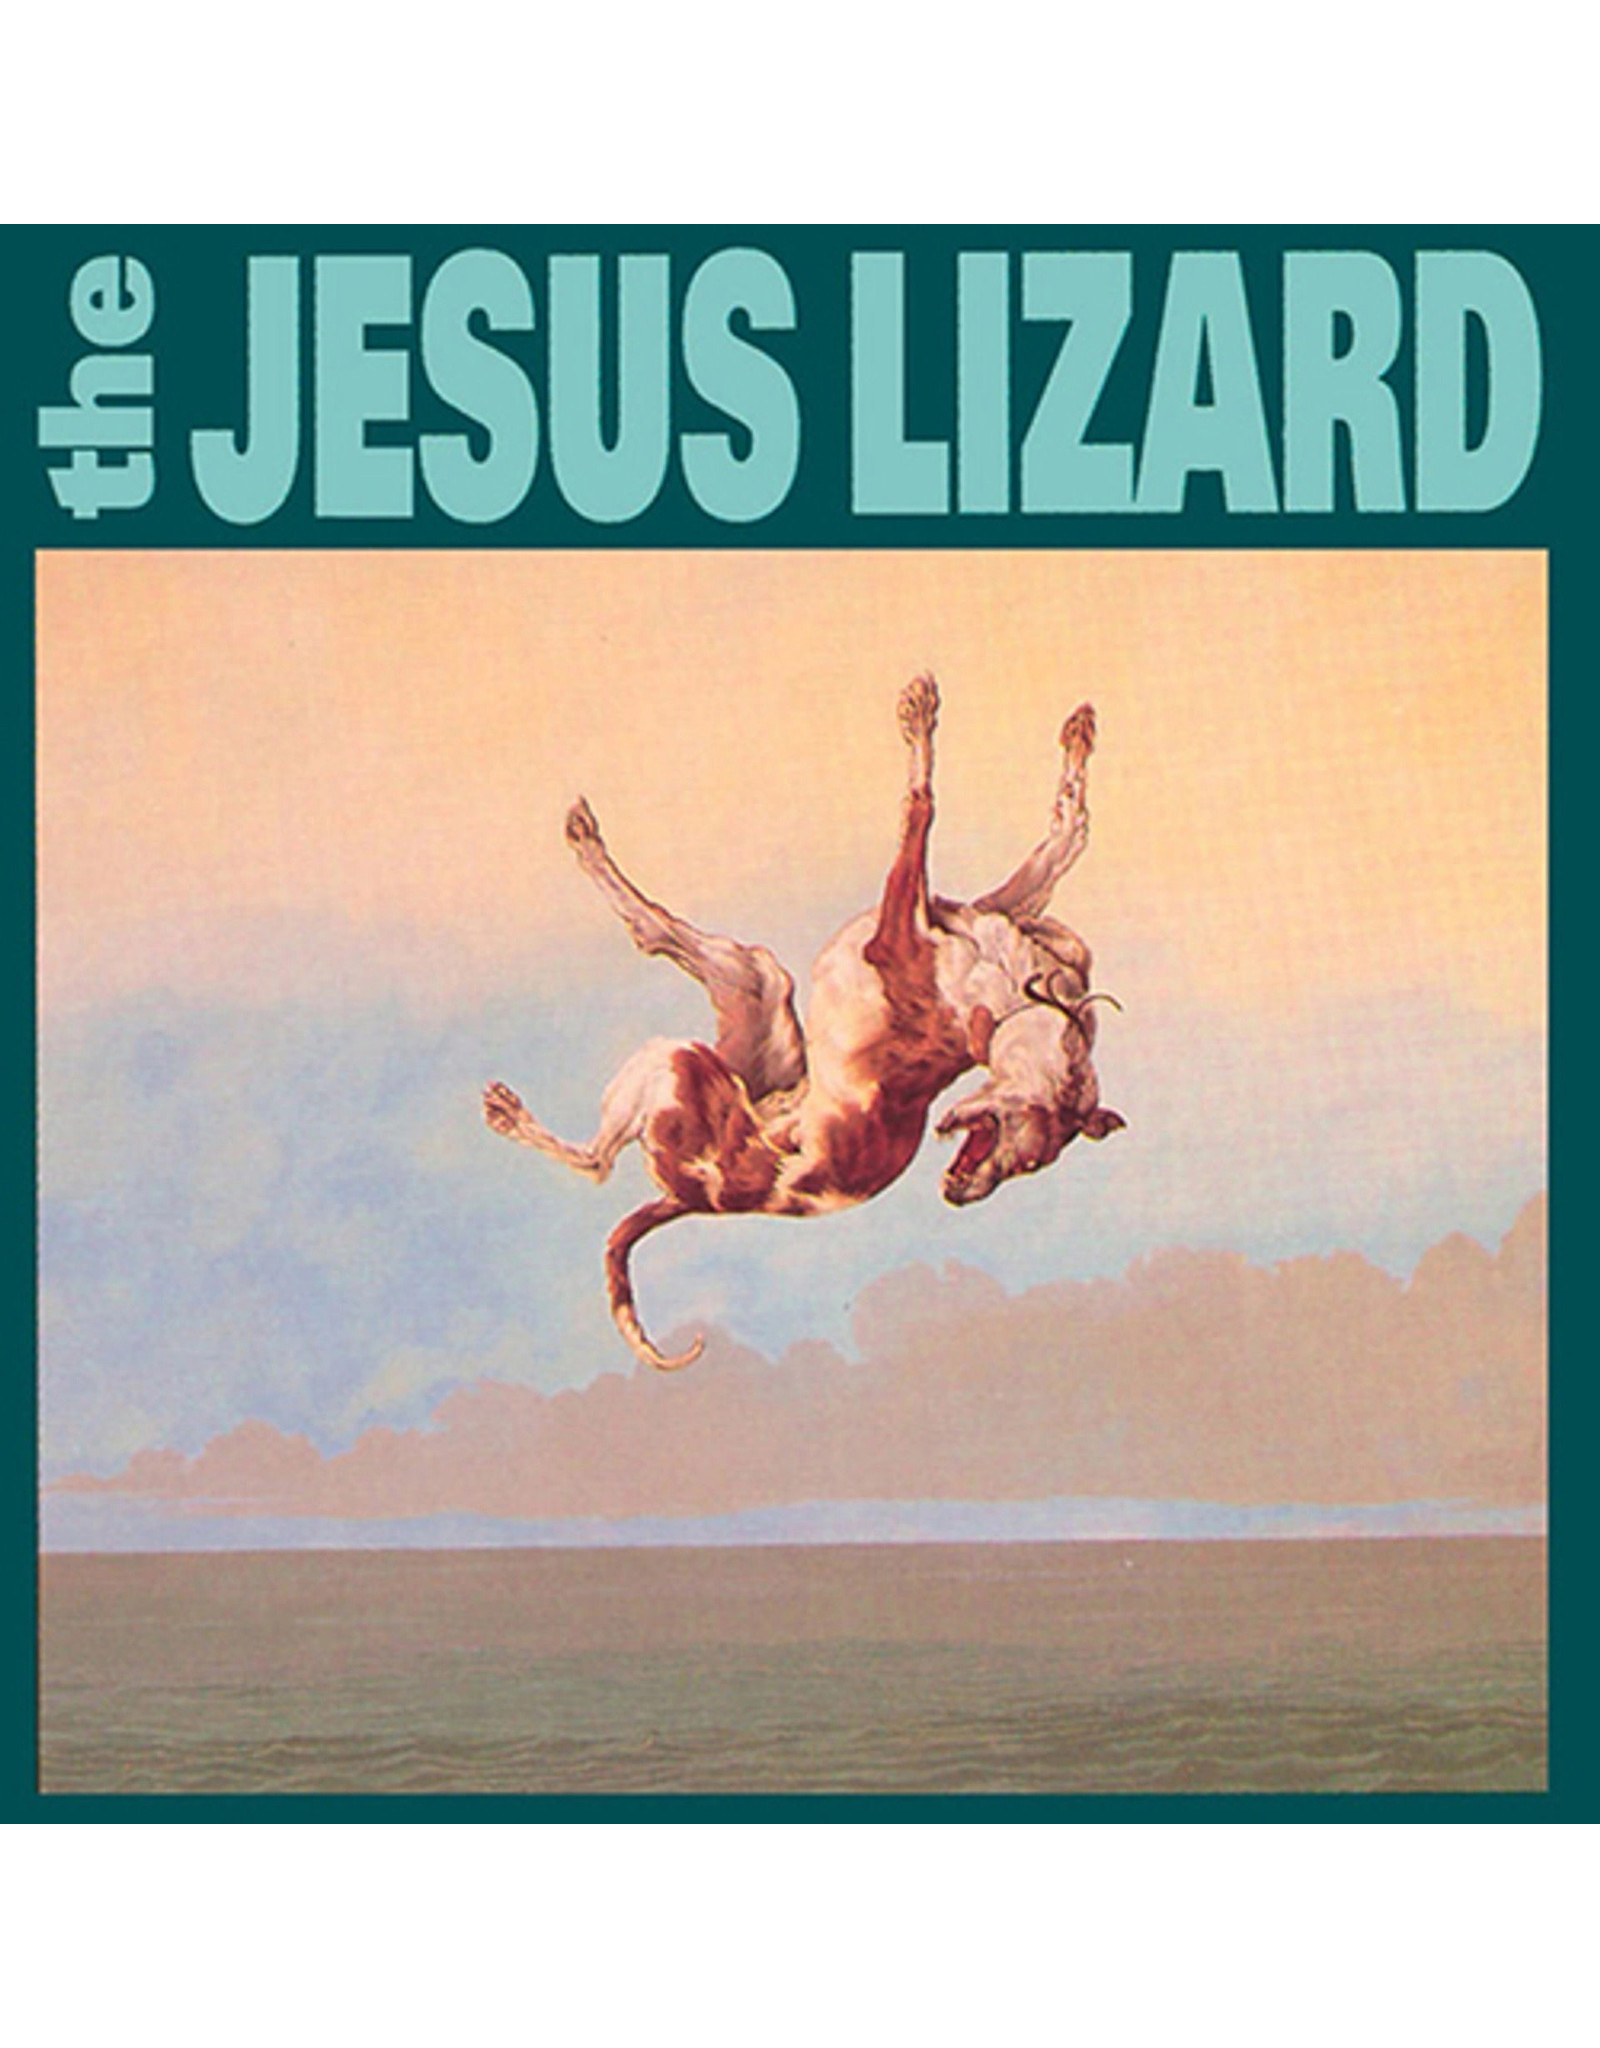 Touch & Go Jesus Lizard: Down (remastered deluxe edition) LP